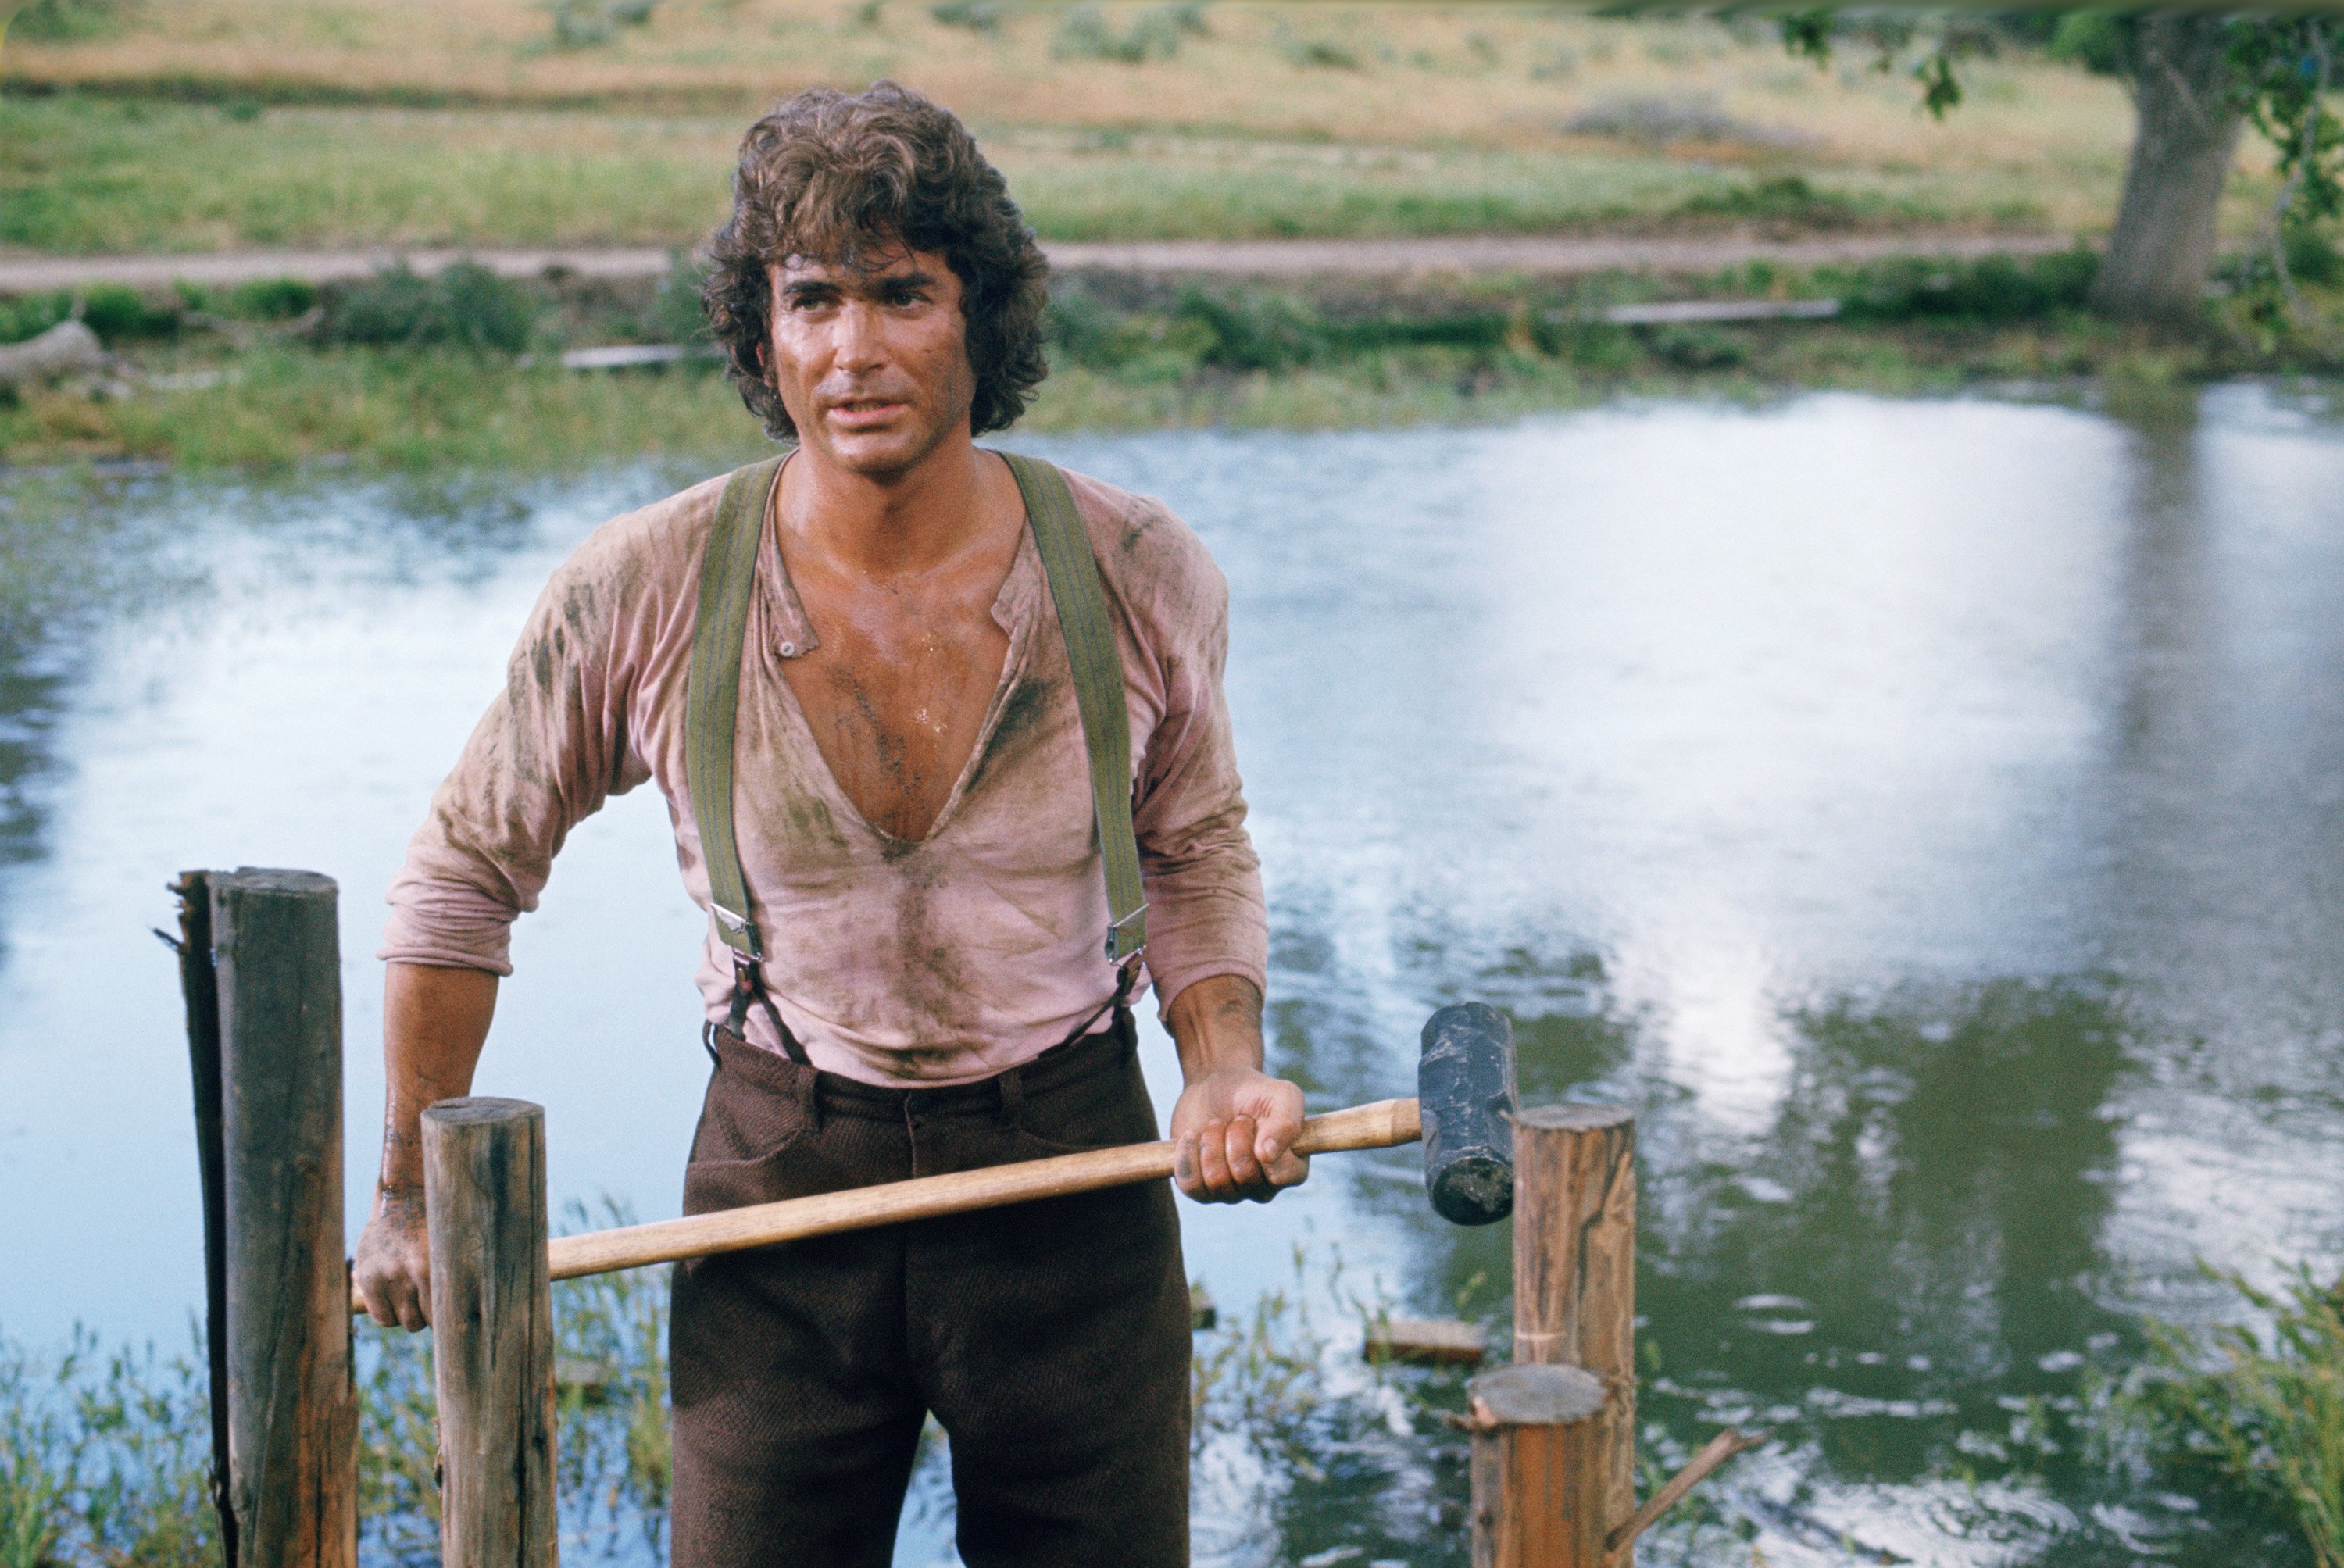 Michael Landon on "Little House on the Prairie" circa 1980 | Source: Getty Images